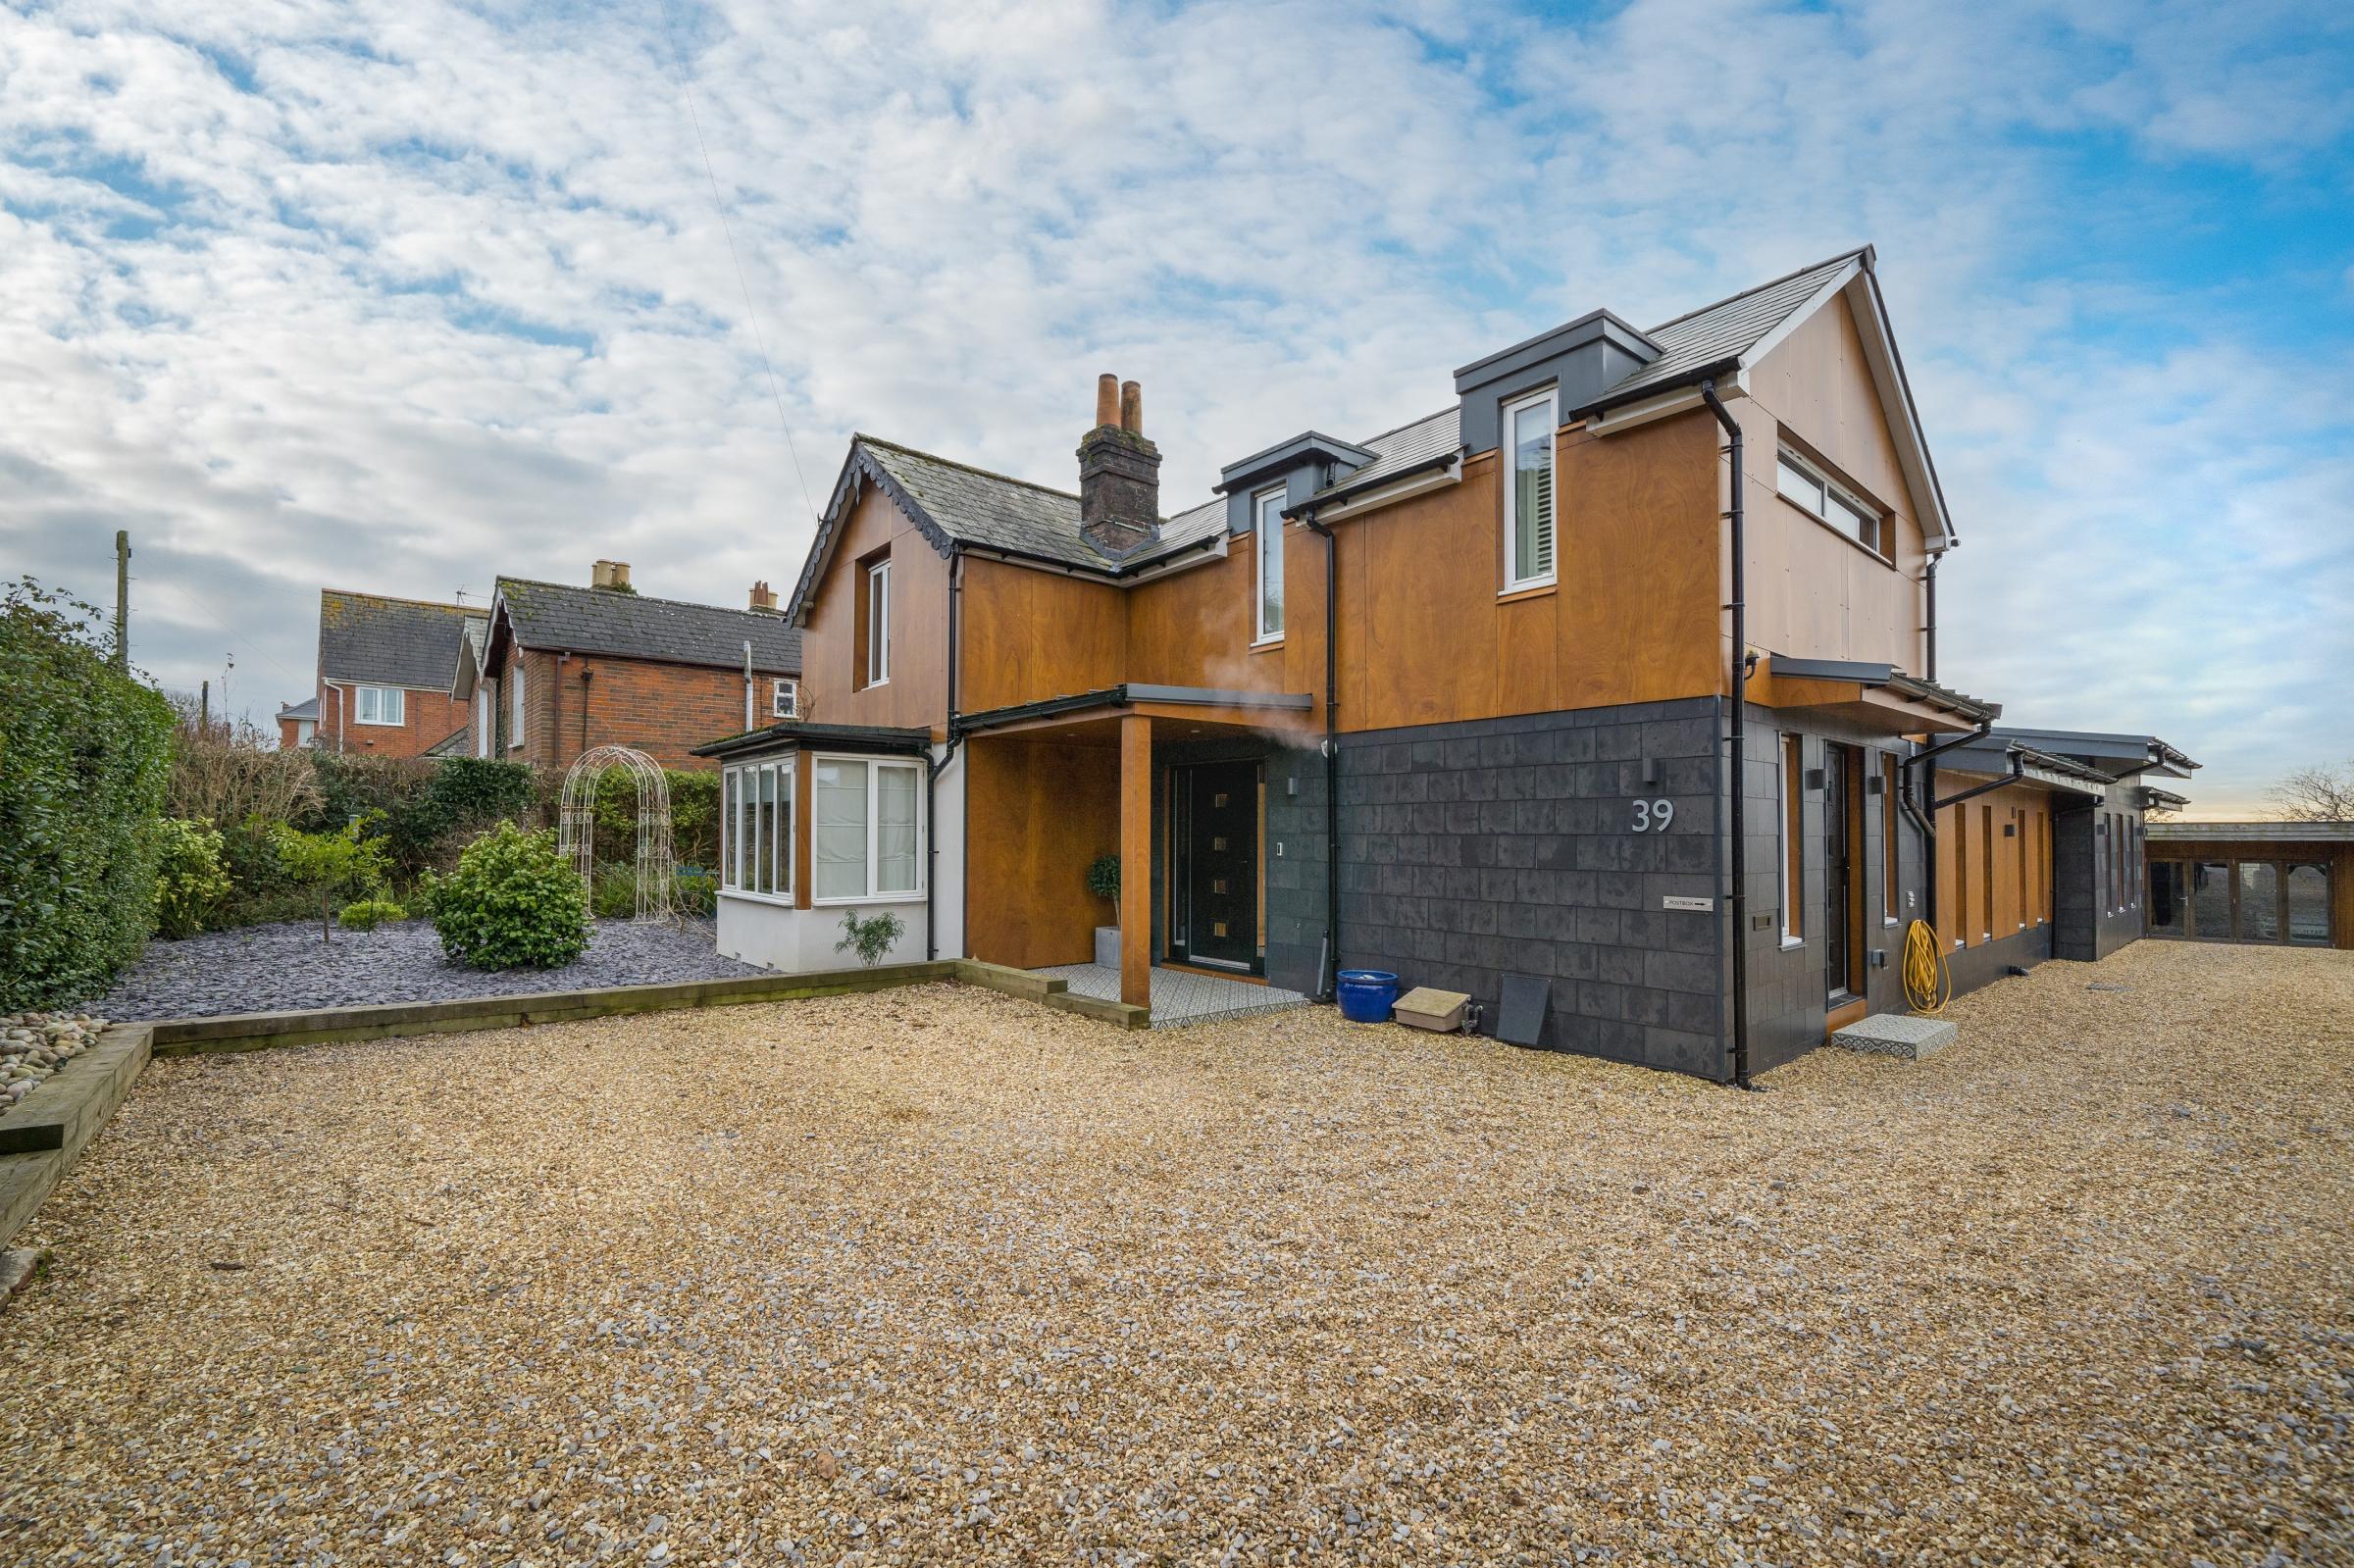 Five-bedroom contemporary Gurnard house with television room